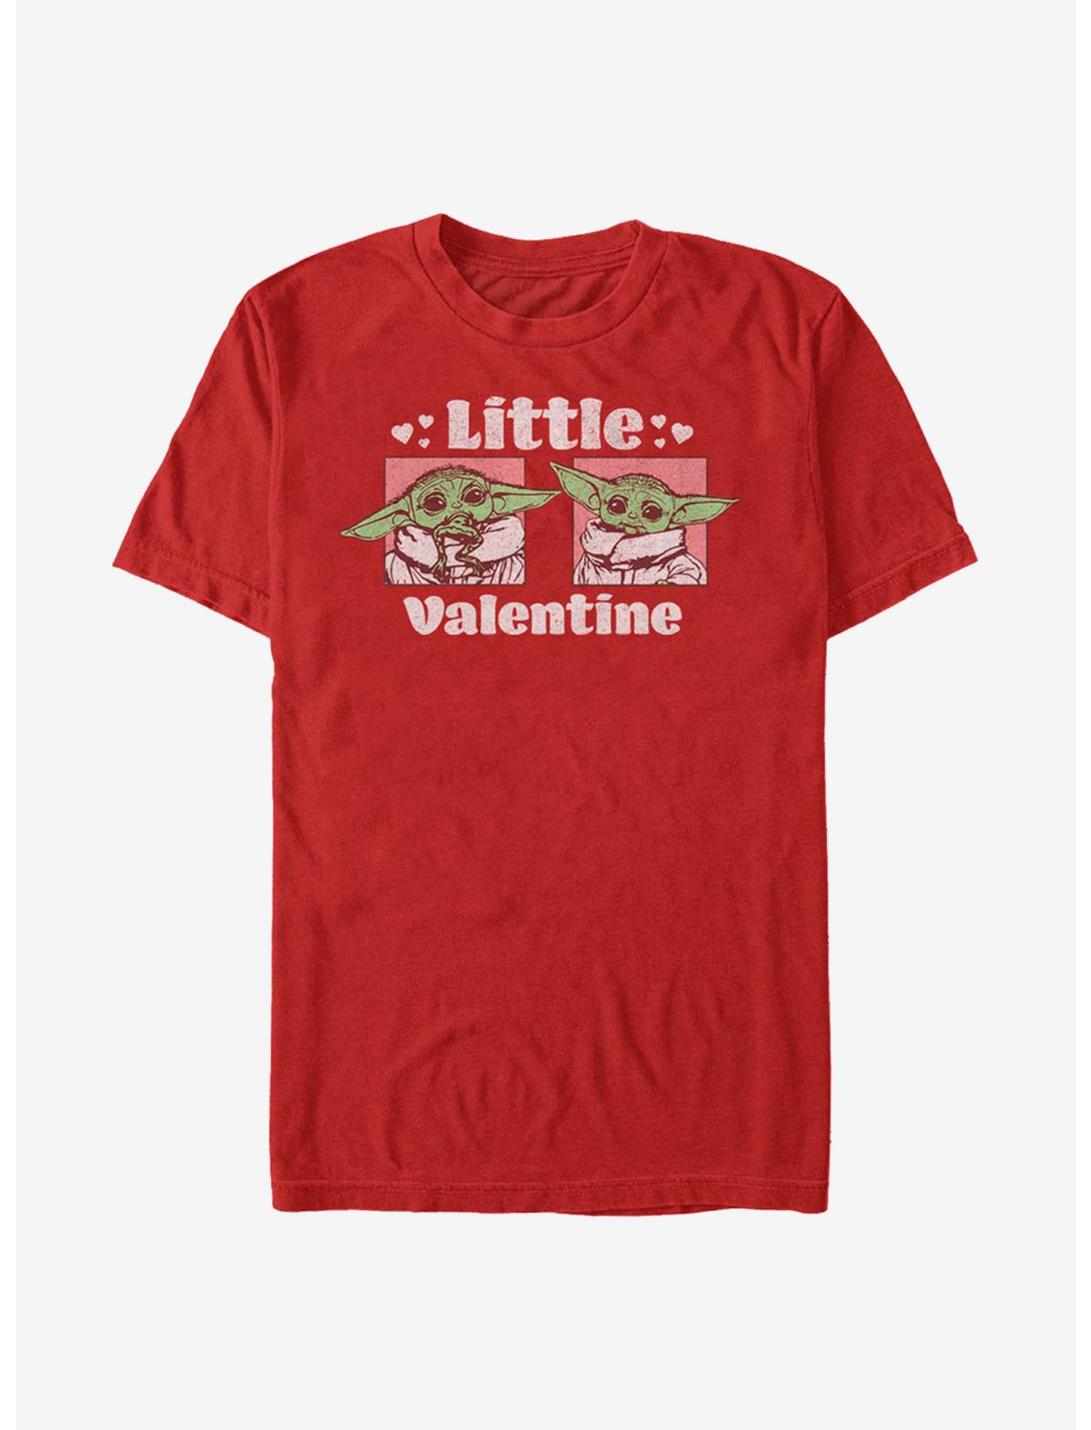 Star Wars The Mandalorian The Child Little Valentine T-Shirt, RED, hi-res